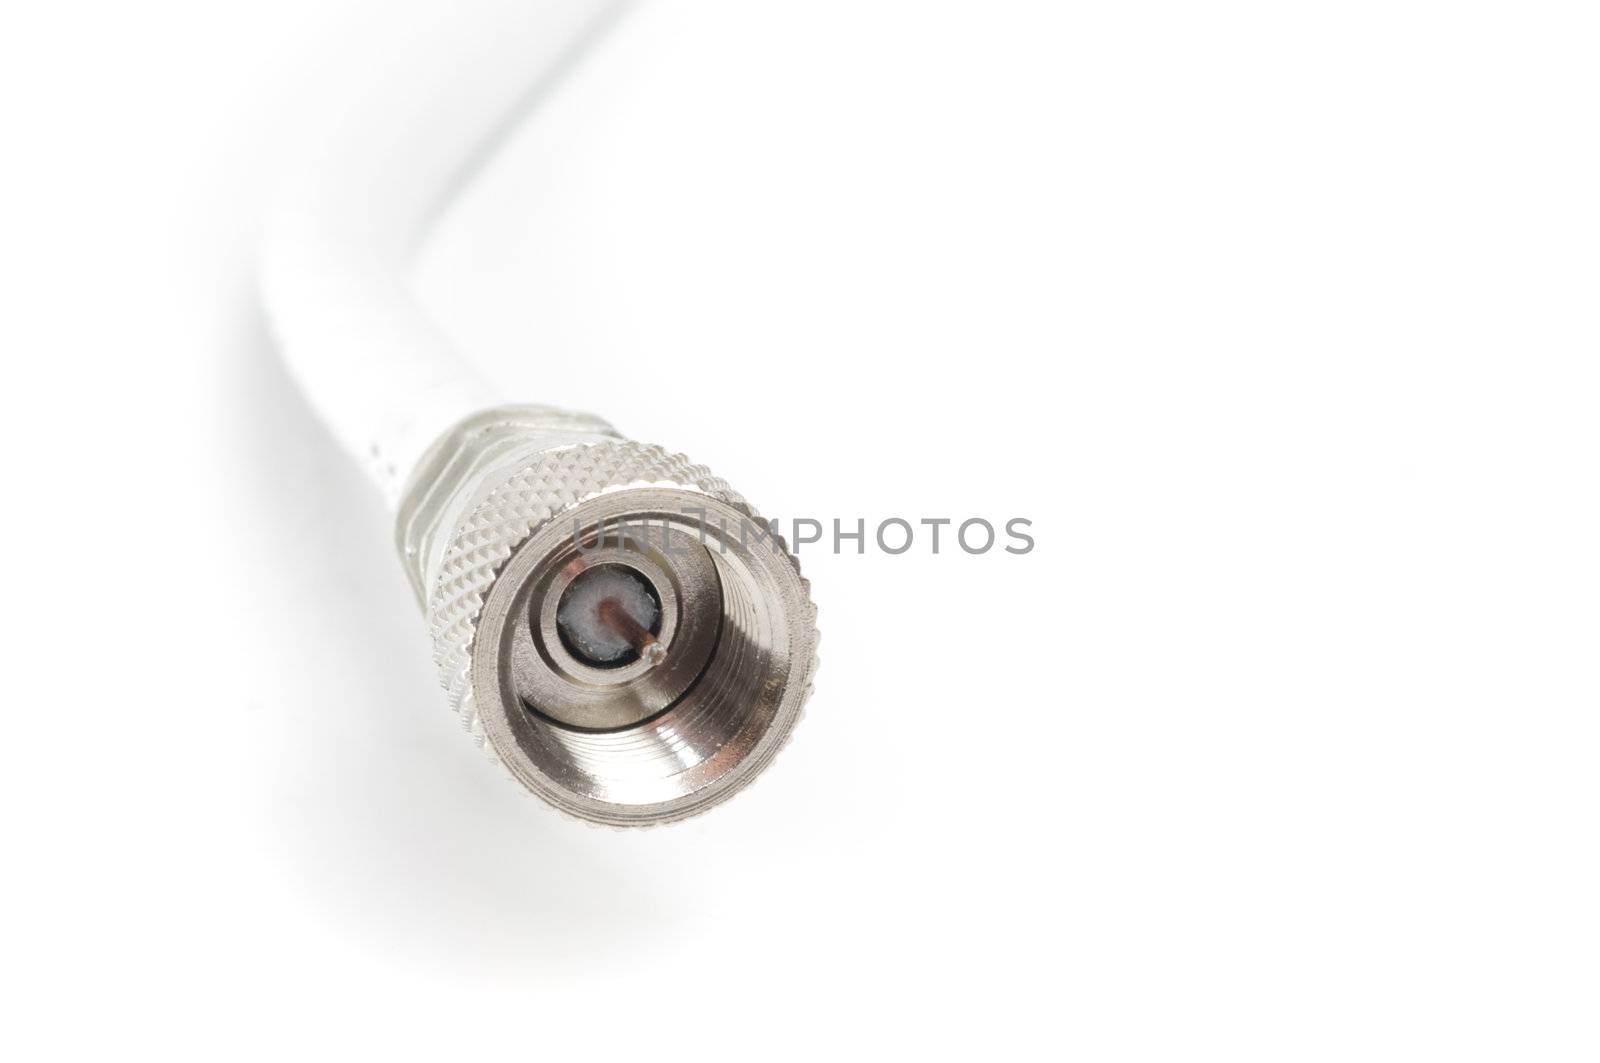 TV connection cable on white background